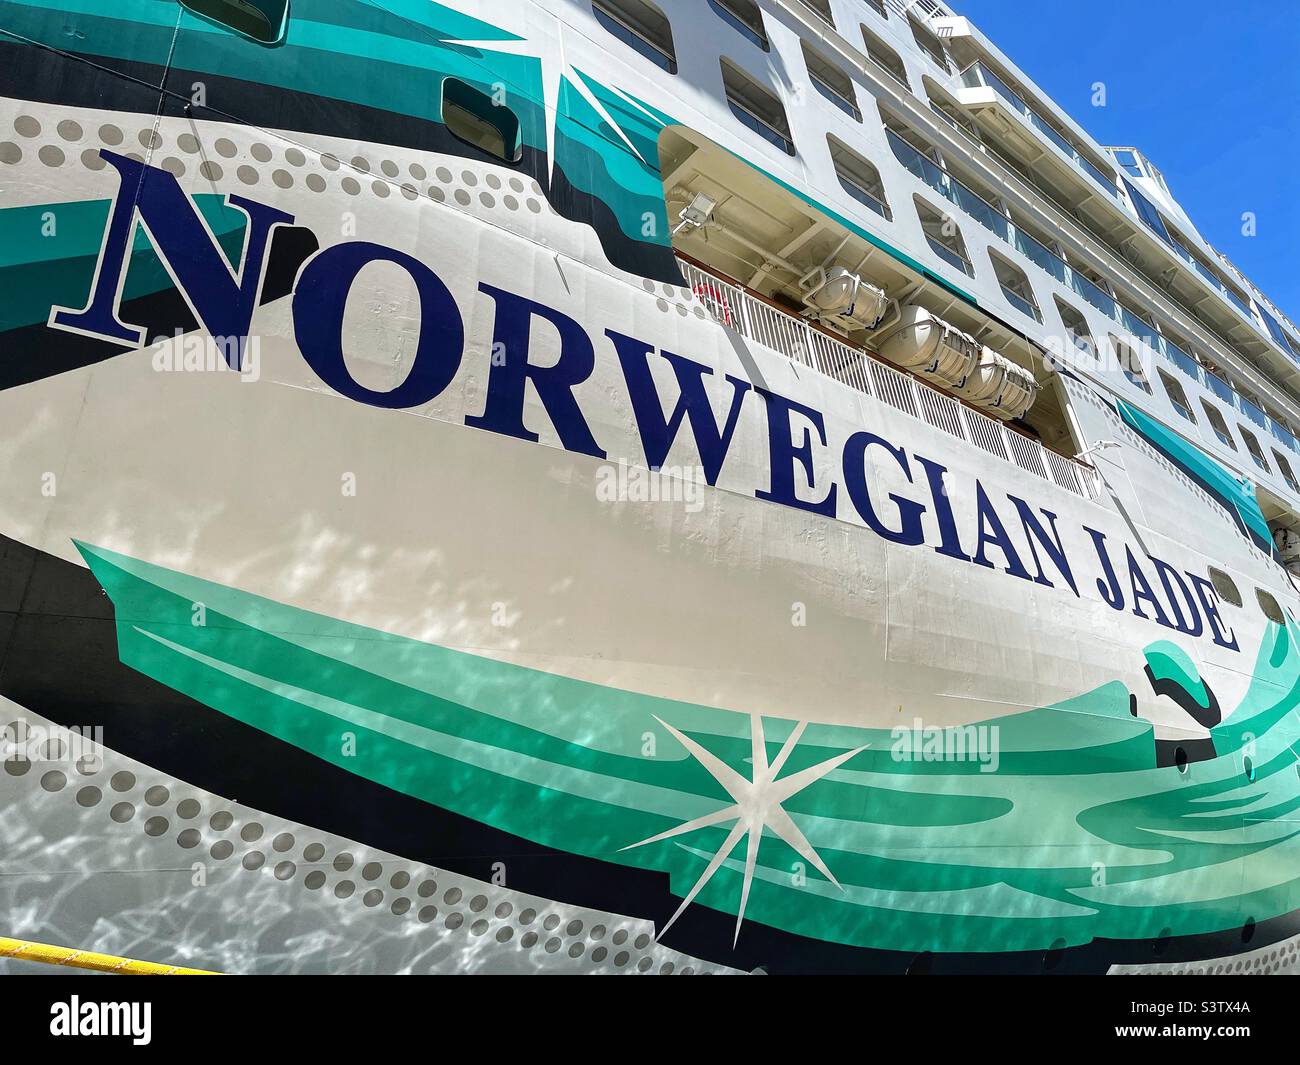 Close up view of the side of the Norwegian Cruise Lines cruise ship Norwegian Jade Stock Photo